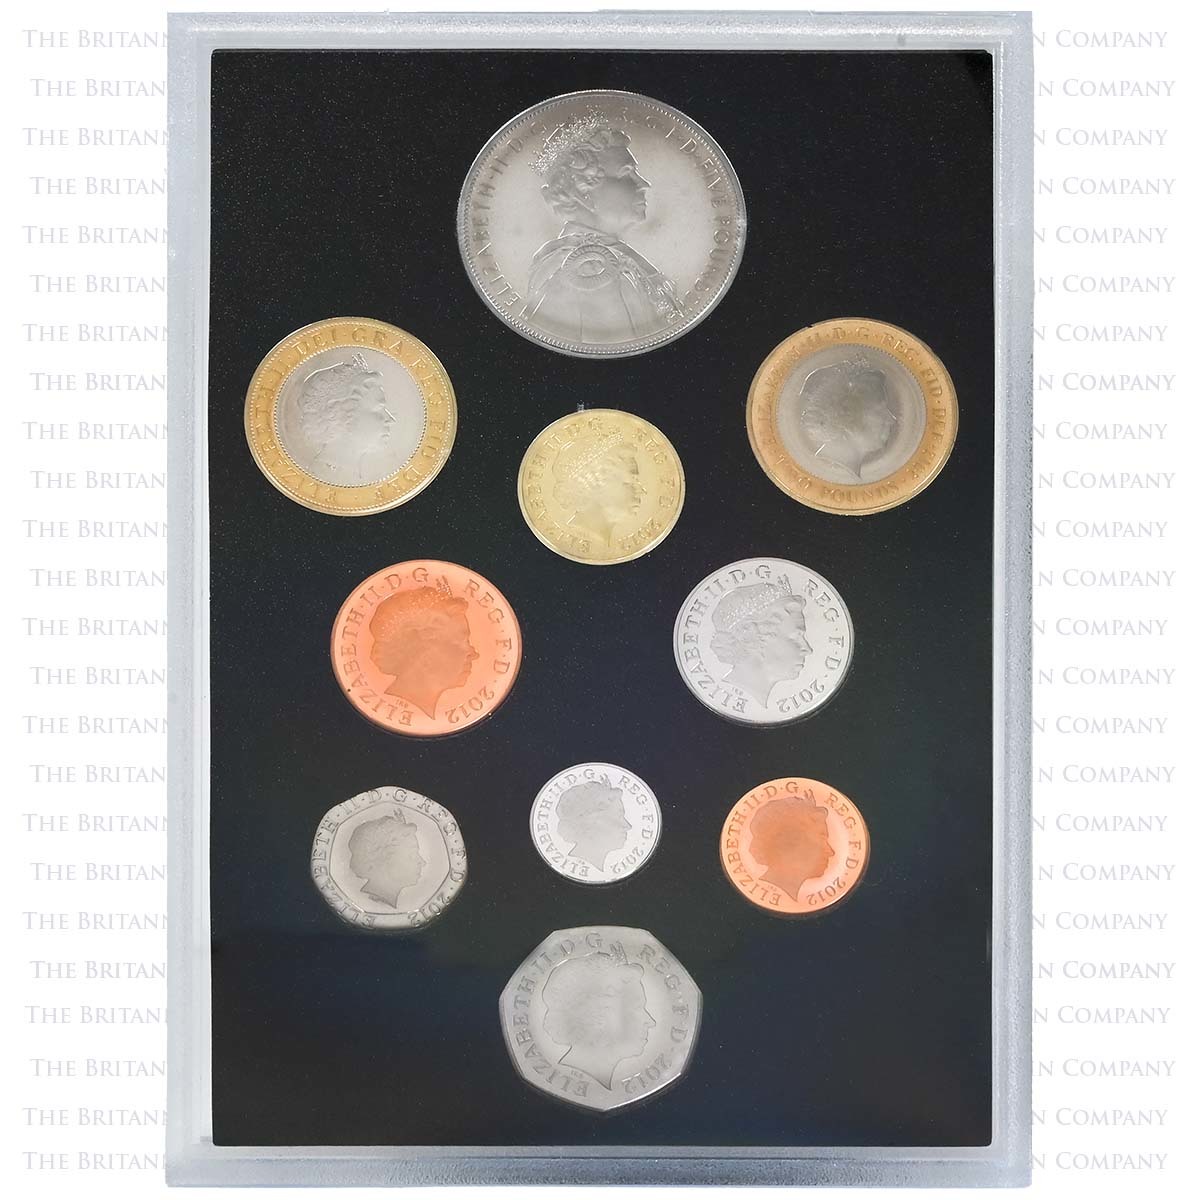 2012-proof-coin-set-003-m